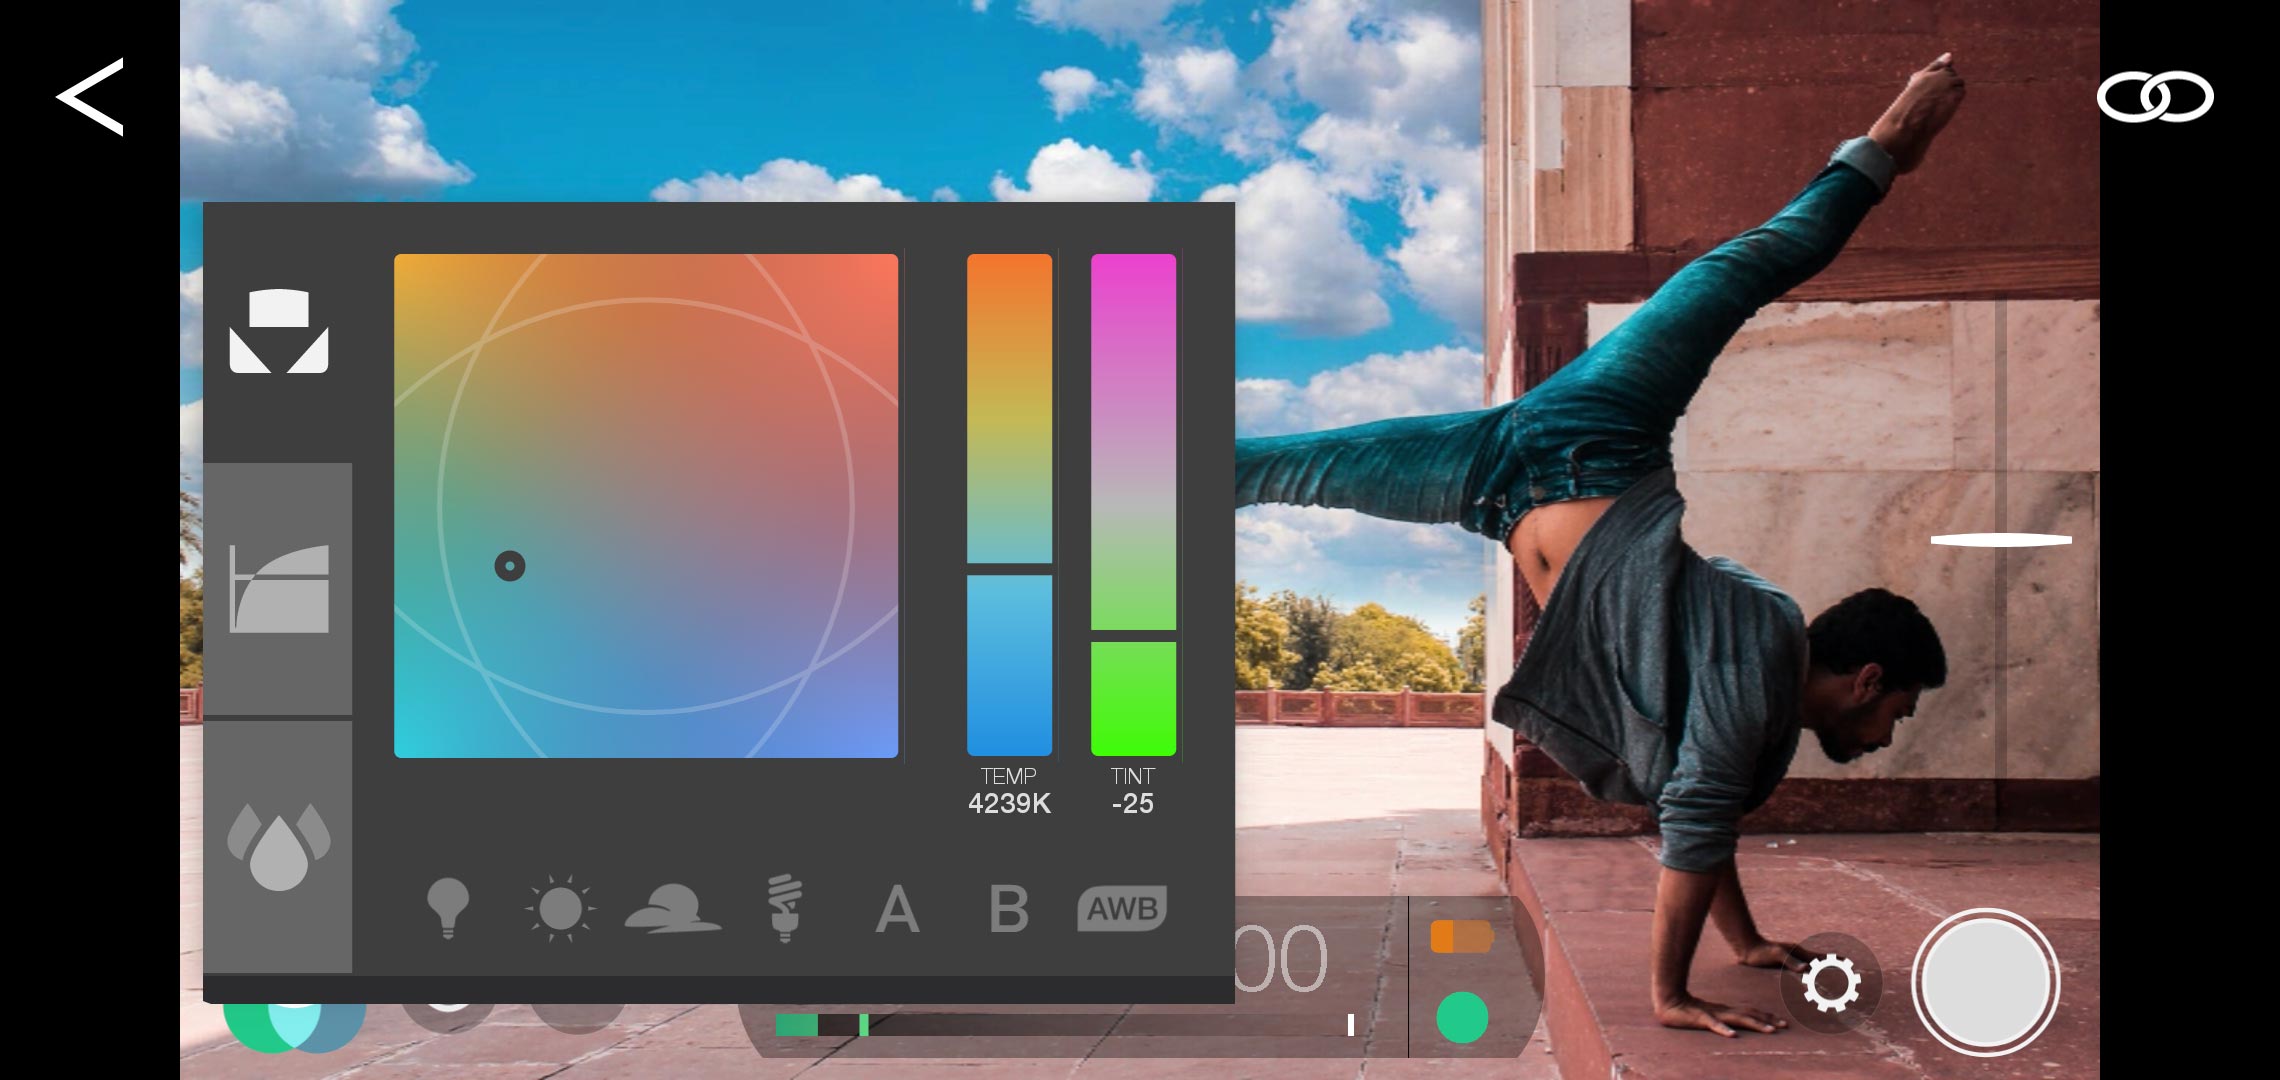 FiLMiC Remote for Android: a complete mobile studio experience